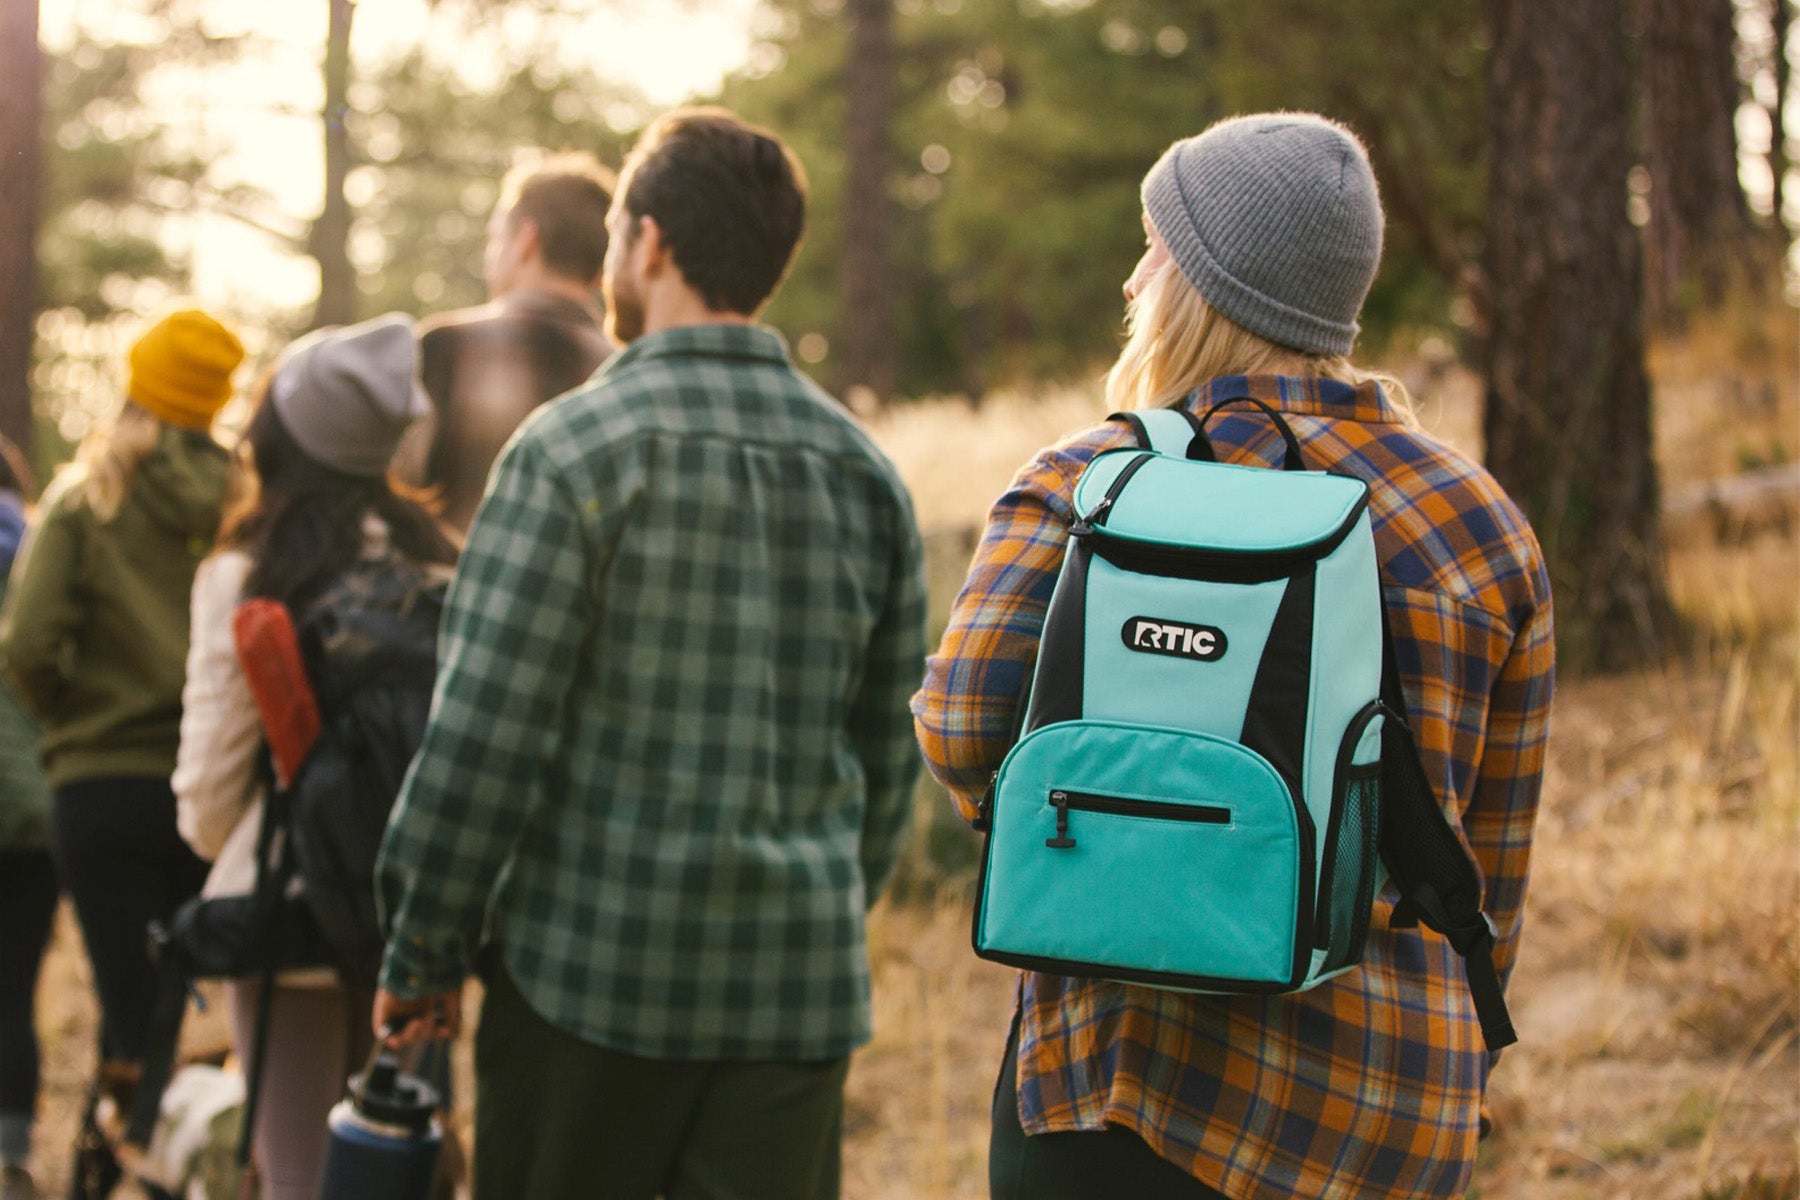 Group of people hiking through woods. Woman has RTIC backpack cooler in Aqua color